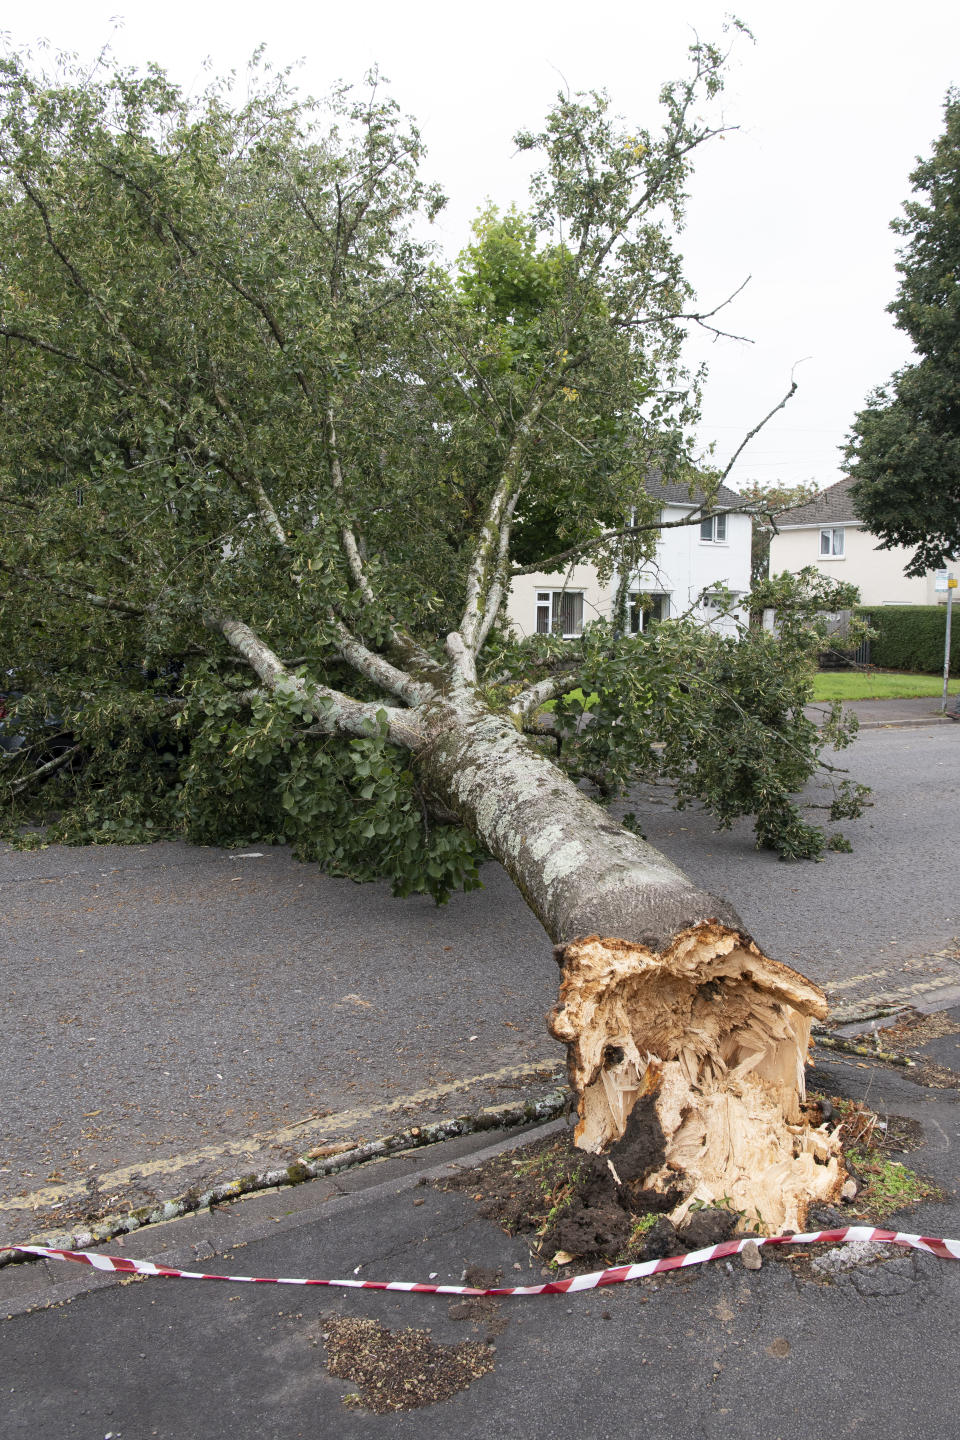 CARDIFF, WALES - AUGUST 25: A fallen tree blocks St. Fagans Road on August 25, 2020 in Cardiff, Wales. The Met Office have issued a yellow weather warning for wind and rain with gusts of 65mph possible inland and 70mph or more possible around coastal areas as Storm Francis passes over the UK. The storm is the second named storm in August and follows Storm Ellen last week. (Photo by Matthew Horwood/Getty Images)